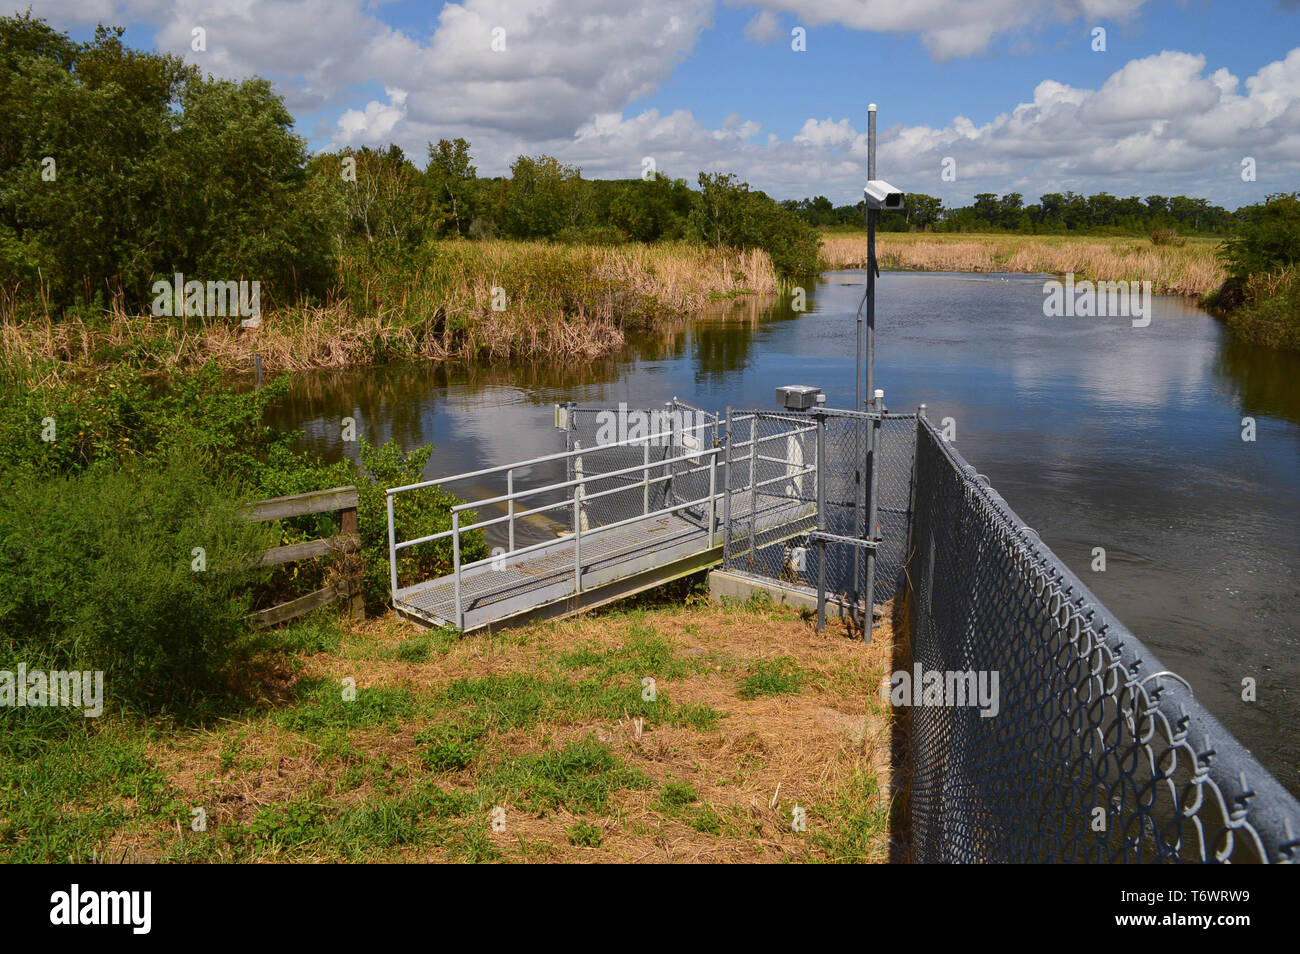 Secure Remote Location Observation Telemetry Fresh Water Lake Level Monitoring Equipment Station Gated Aluminum Walkway Chain Length Fence Florida Stock Photo